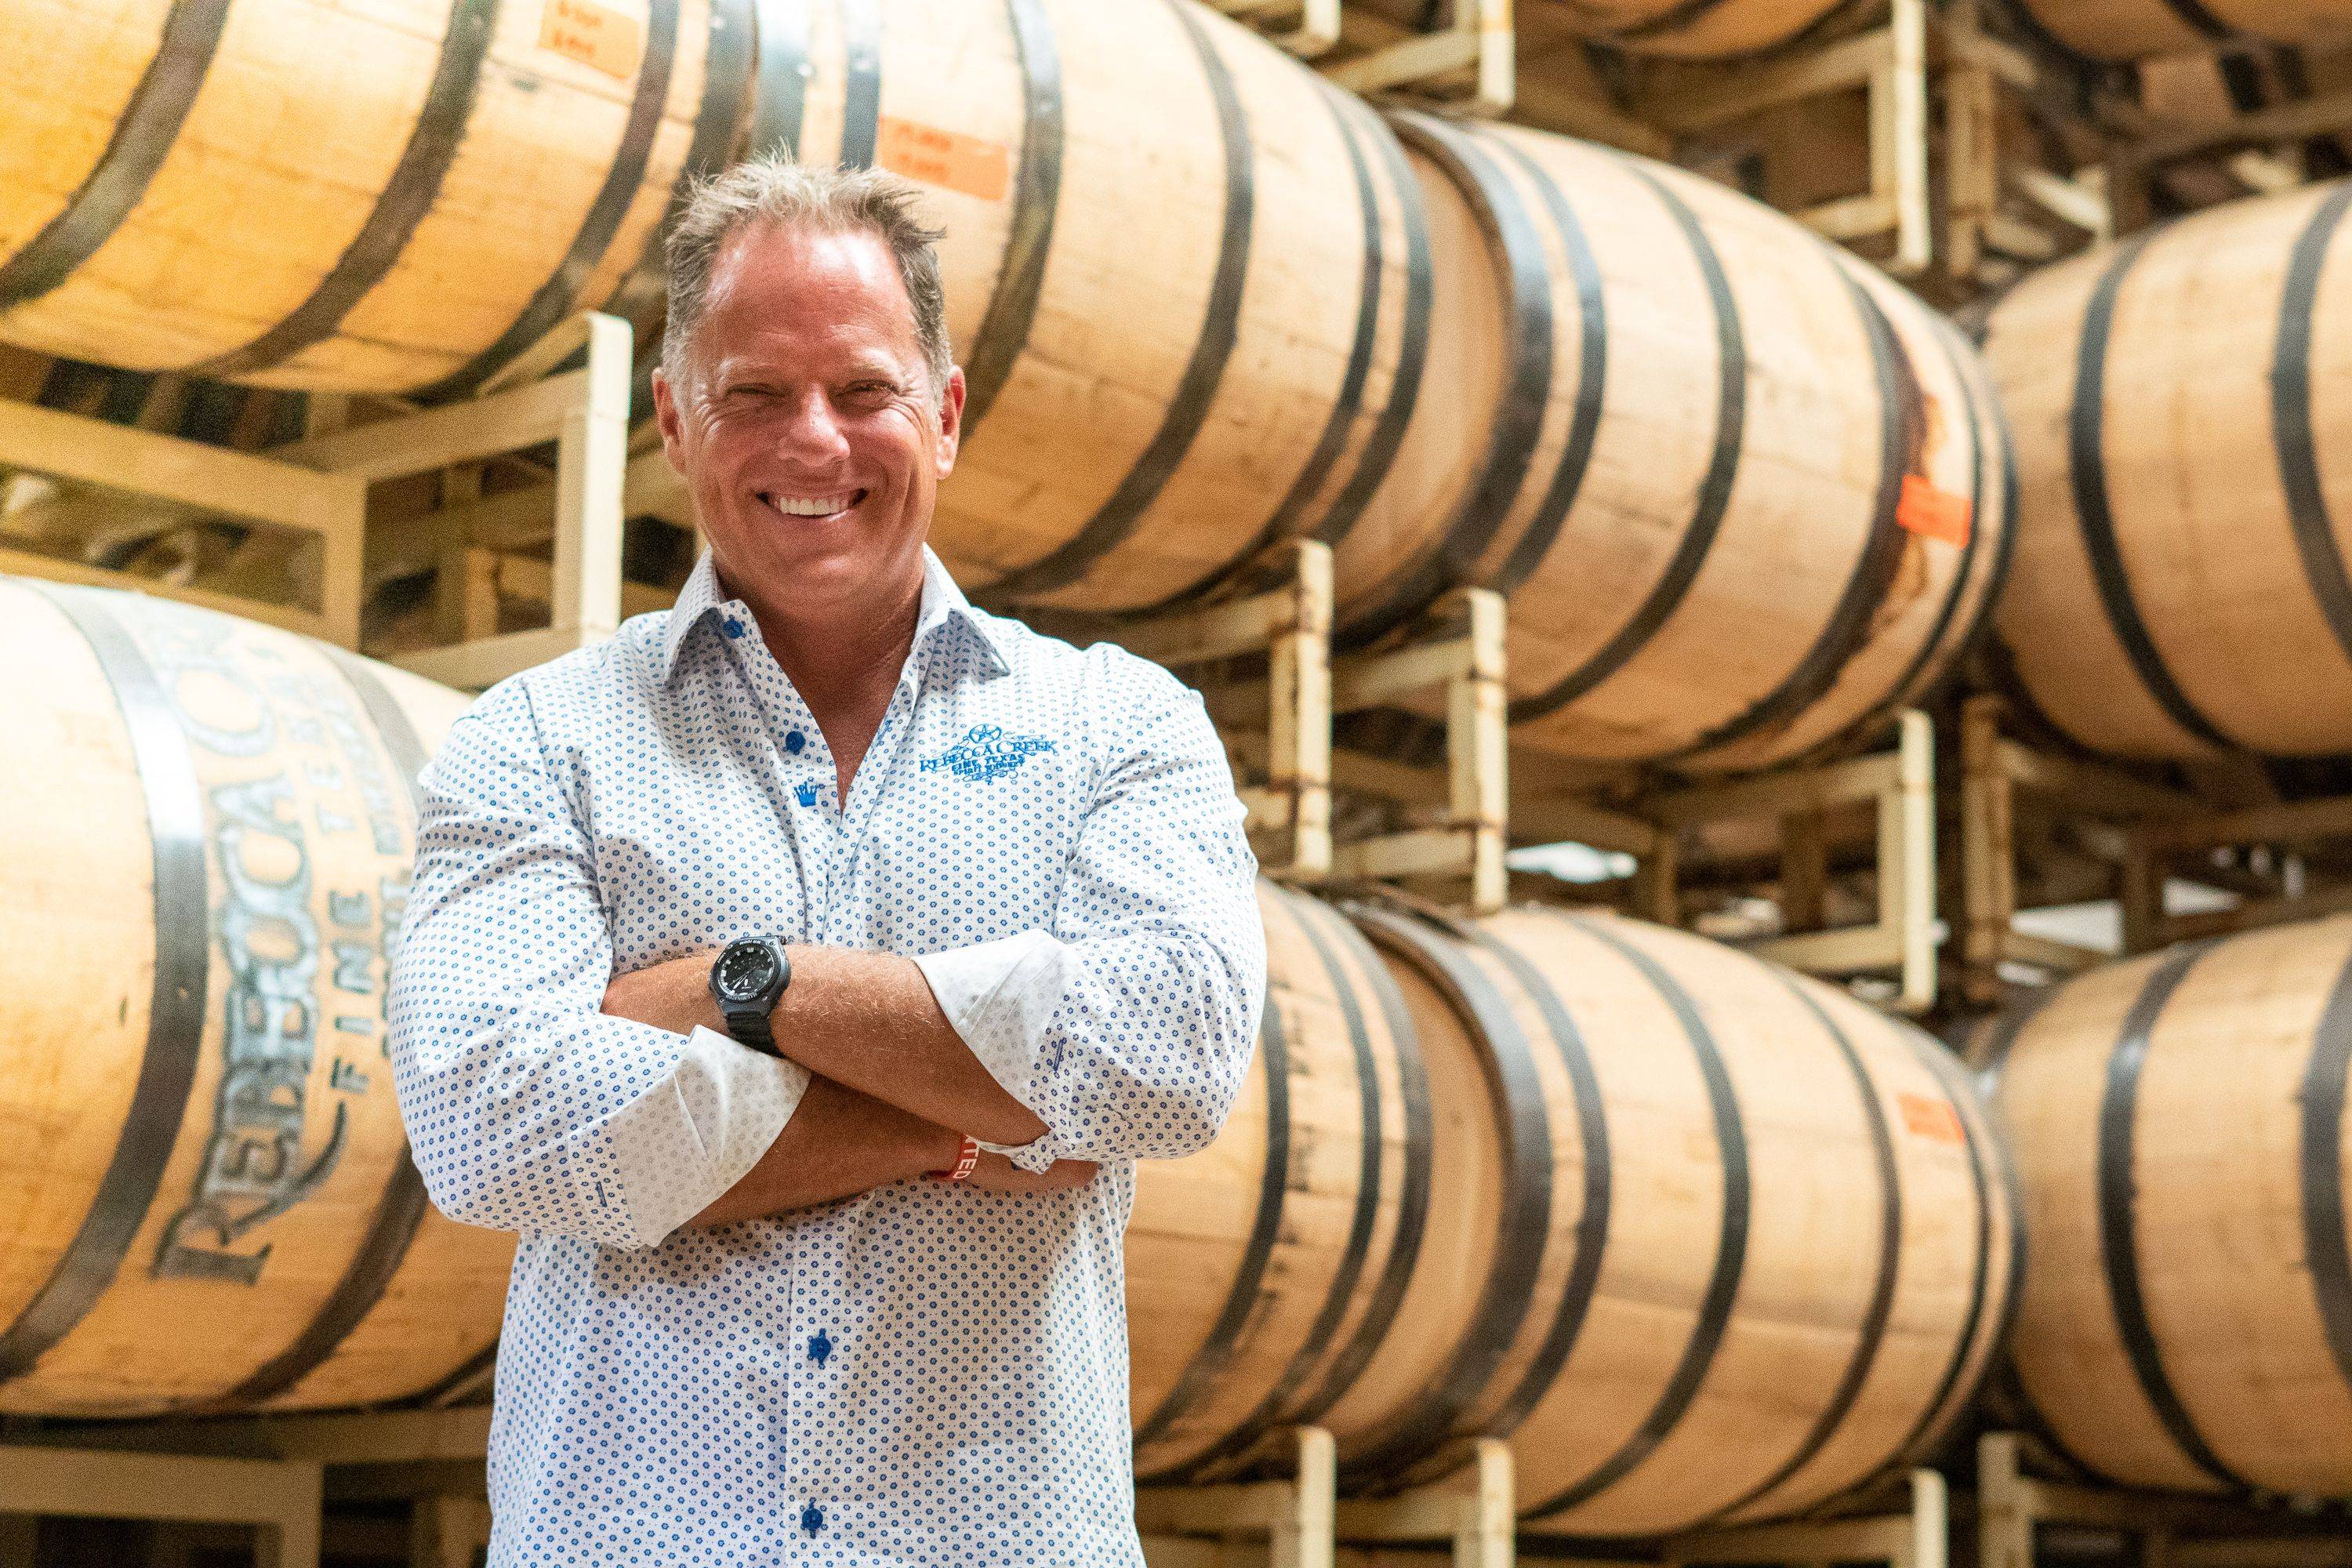 man smiling in front of wine barrels with arms crossed